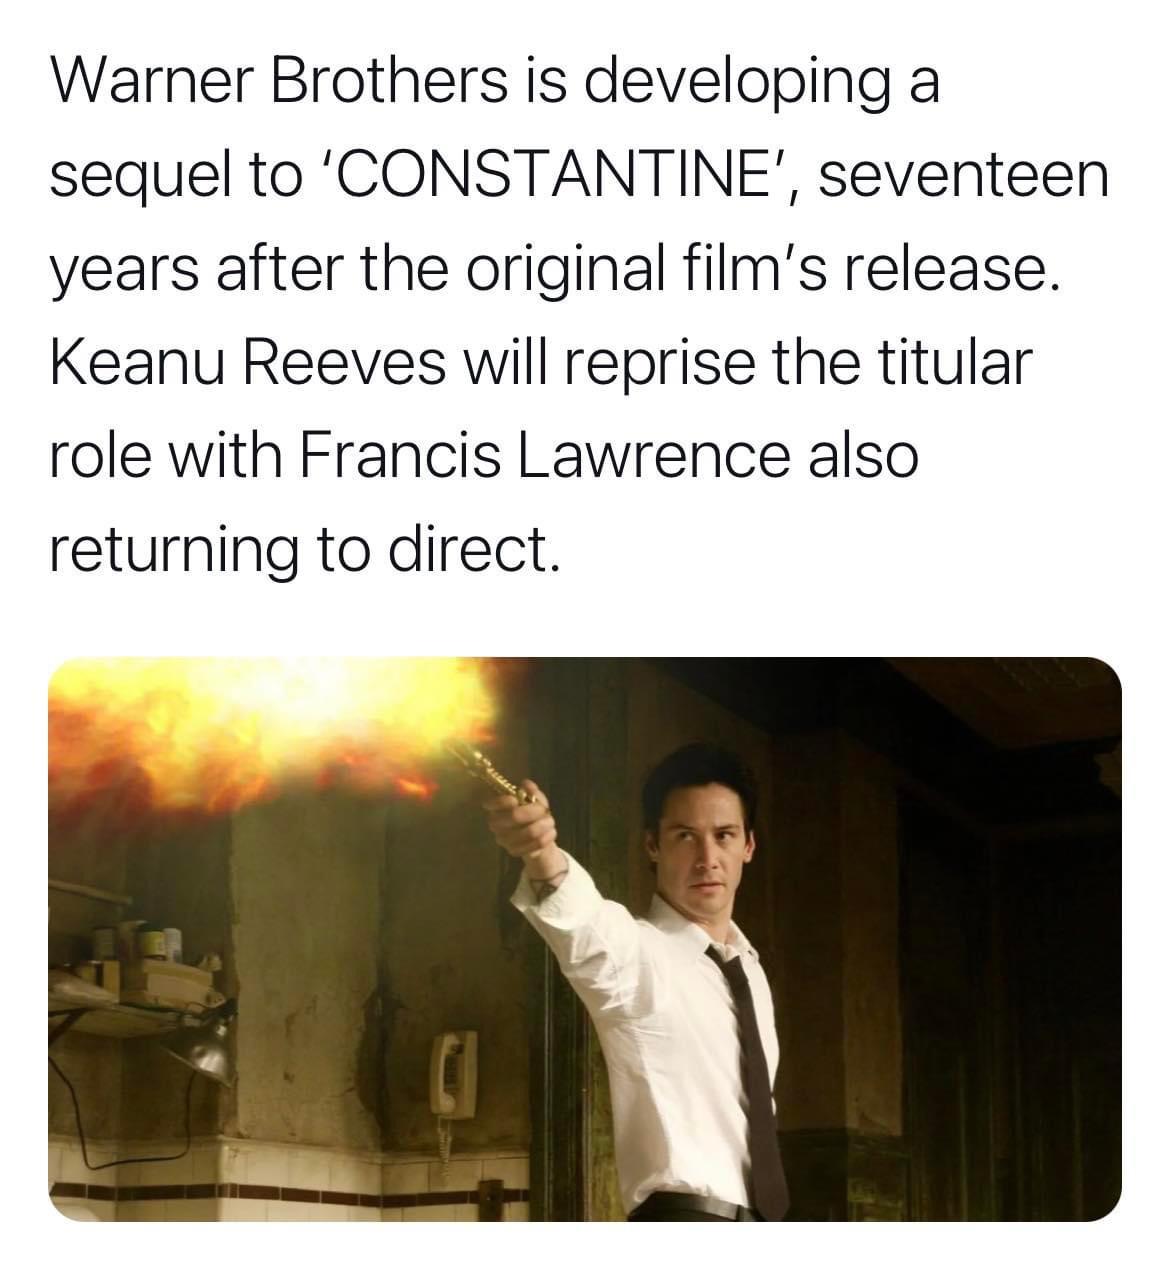 monday morning randomness - Warner Brothers is developing sequel to 'Constantine', seventeen years after the original film's release. Keanu Reeves will reprise the titular role with Francis Lawrence also returning to direct.